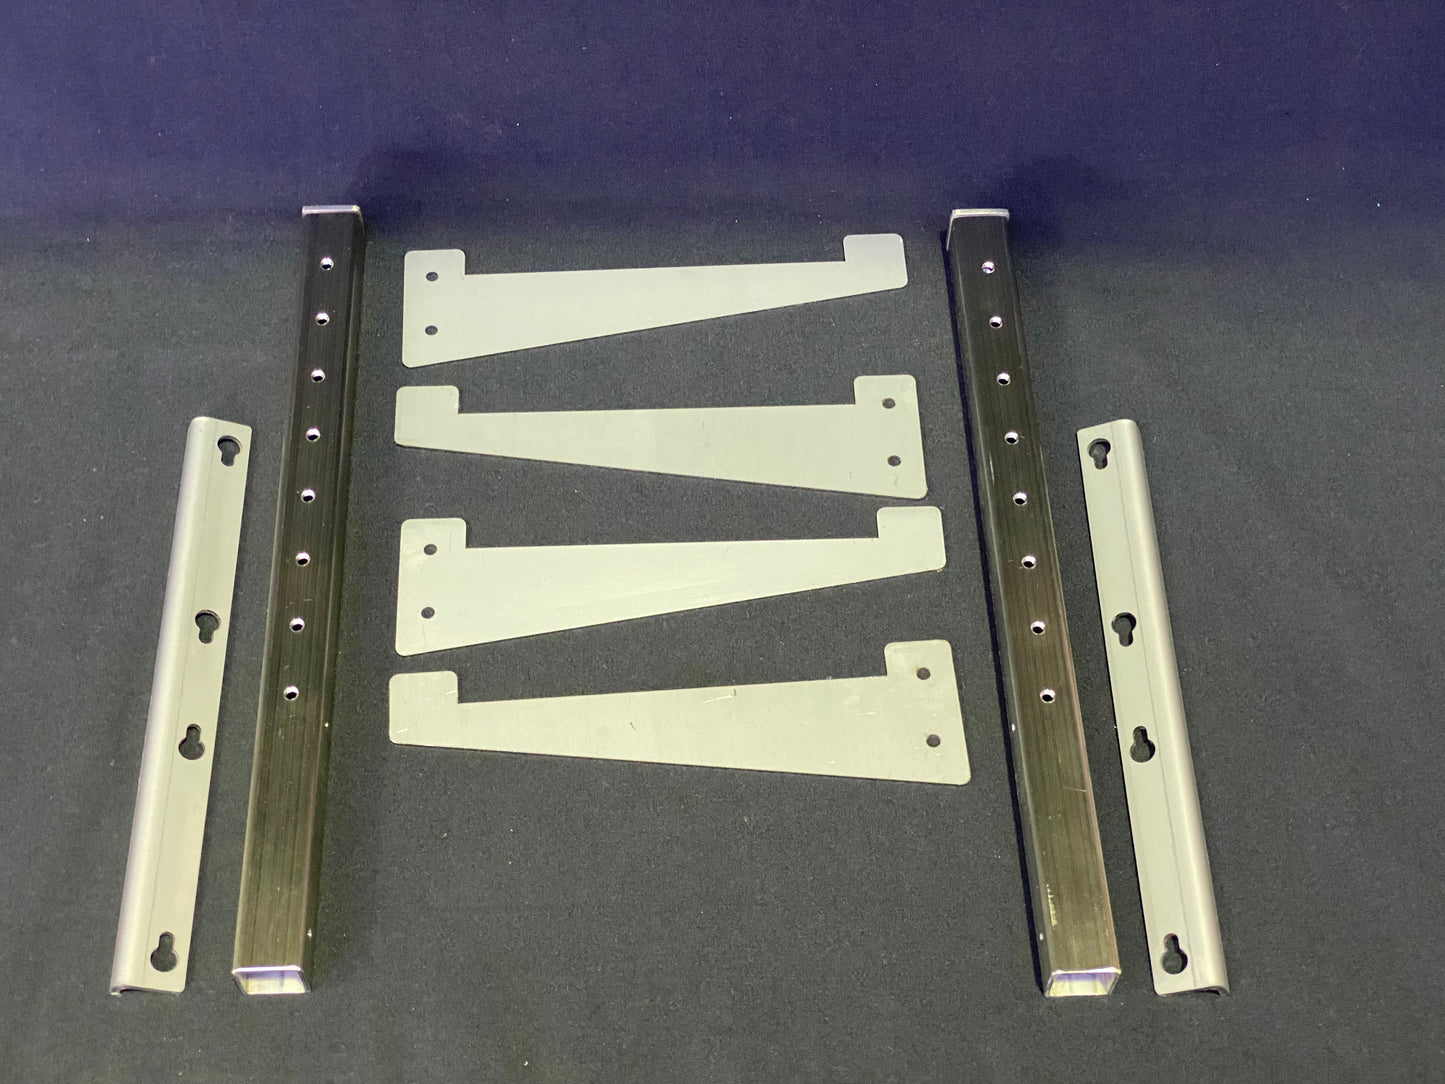 Components of the chef's workstation - mounting brackets, risers, and workstation brackets